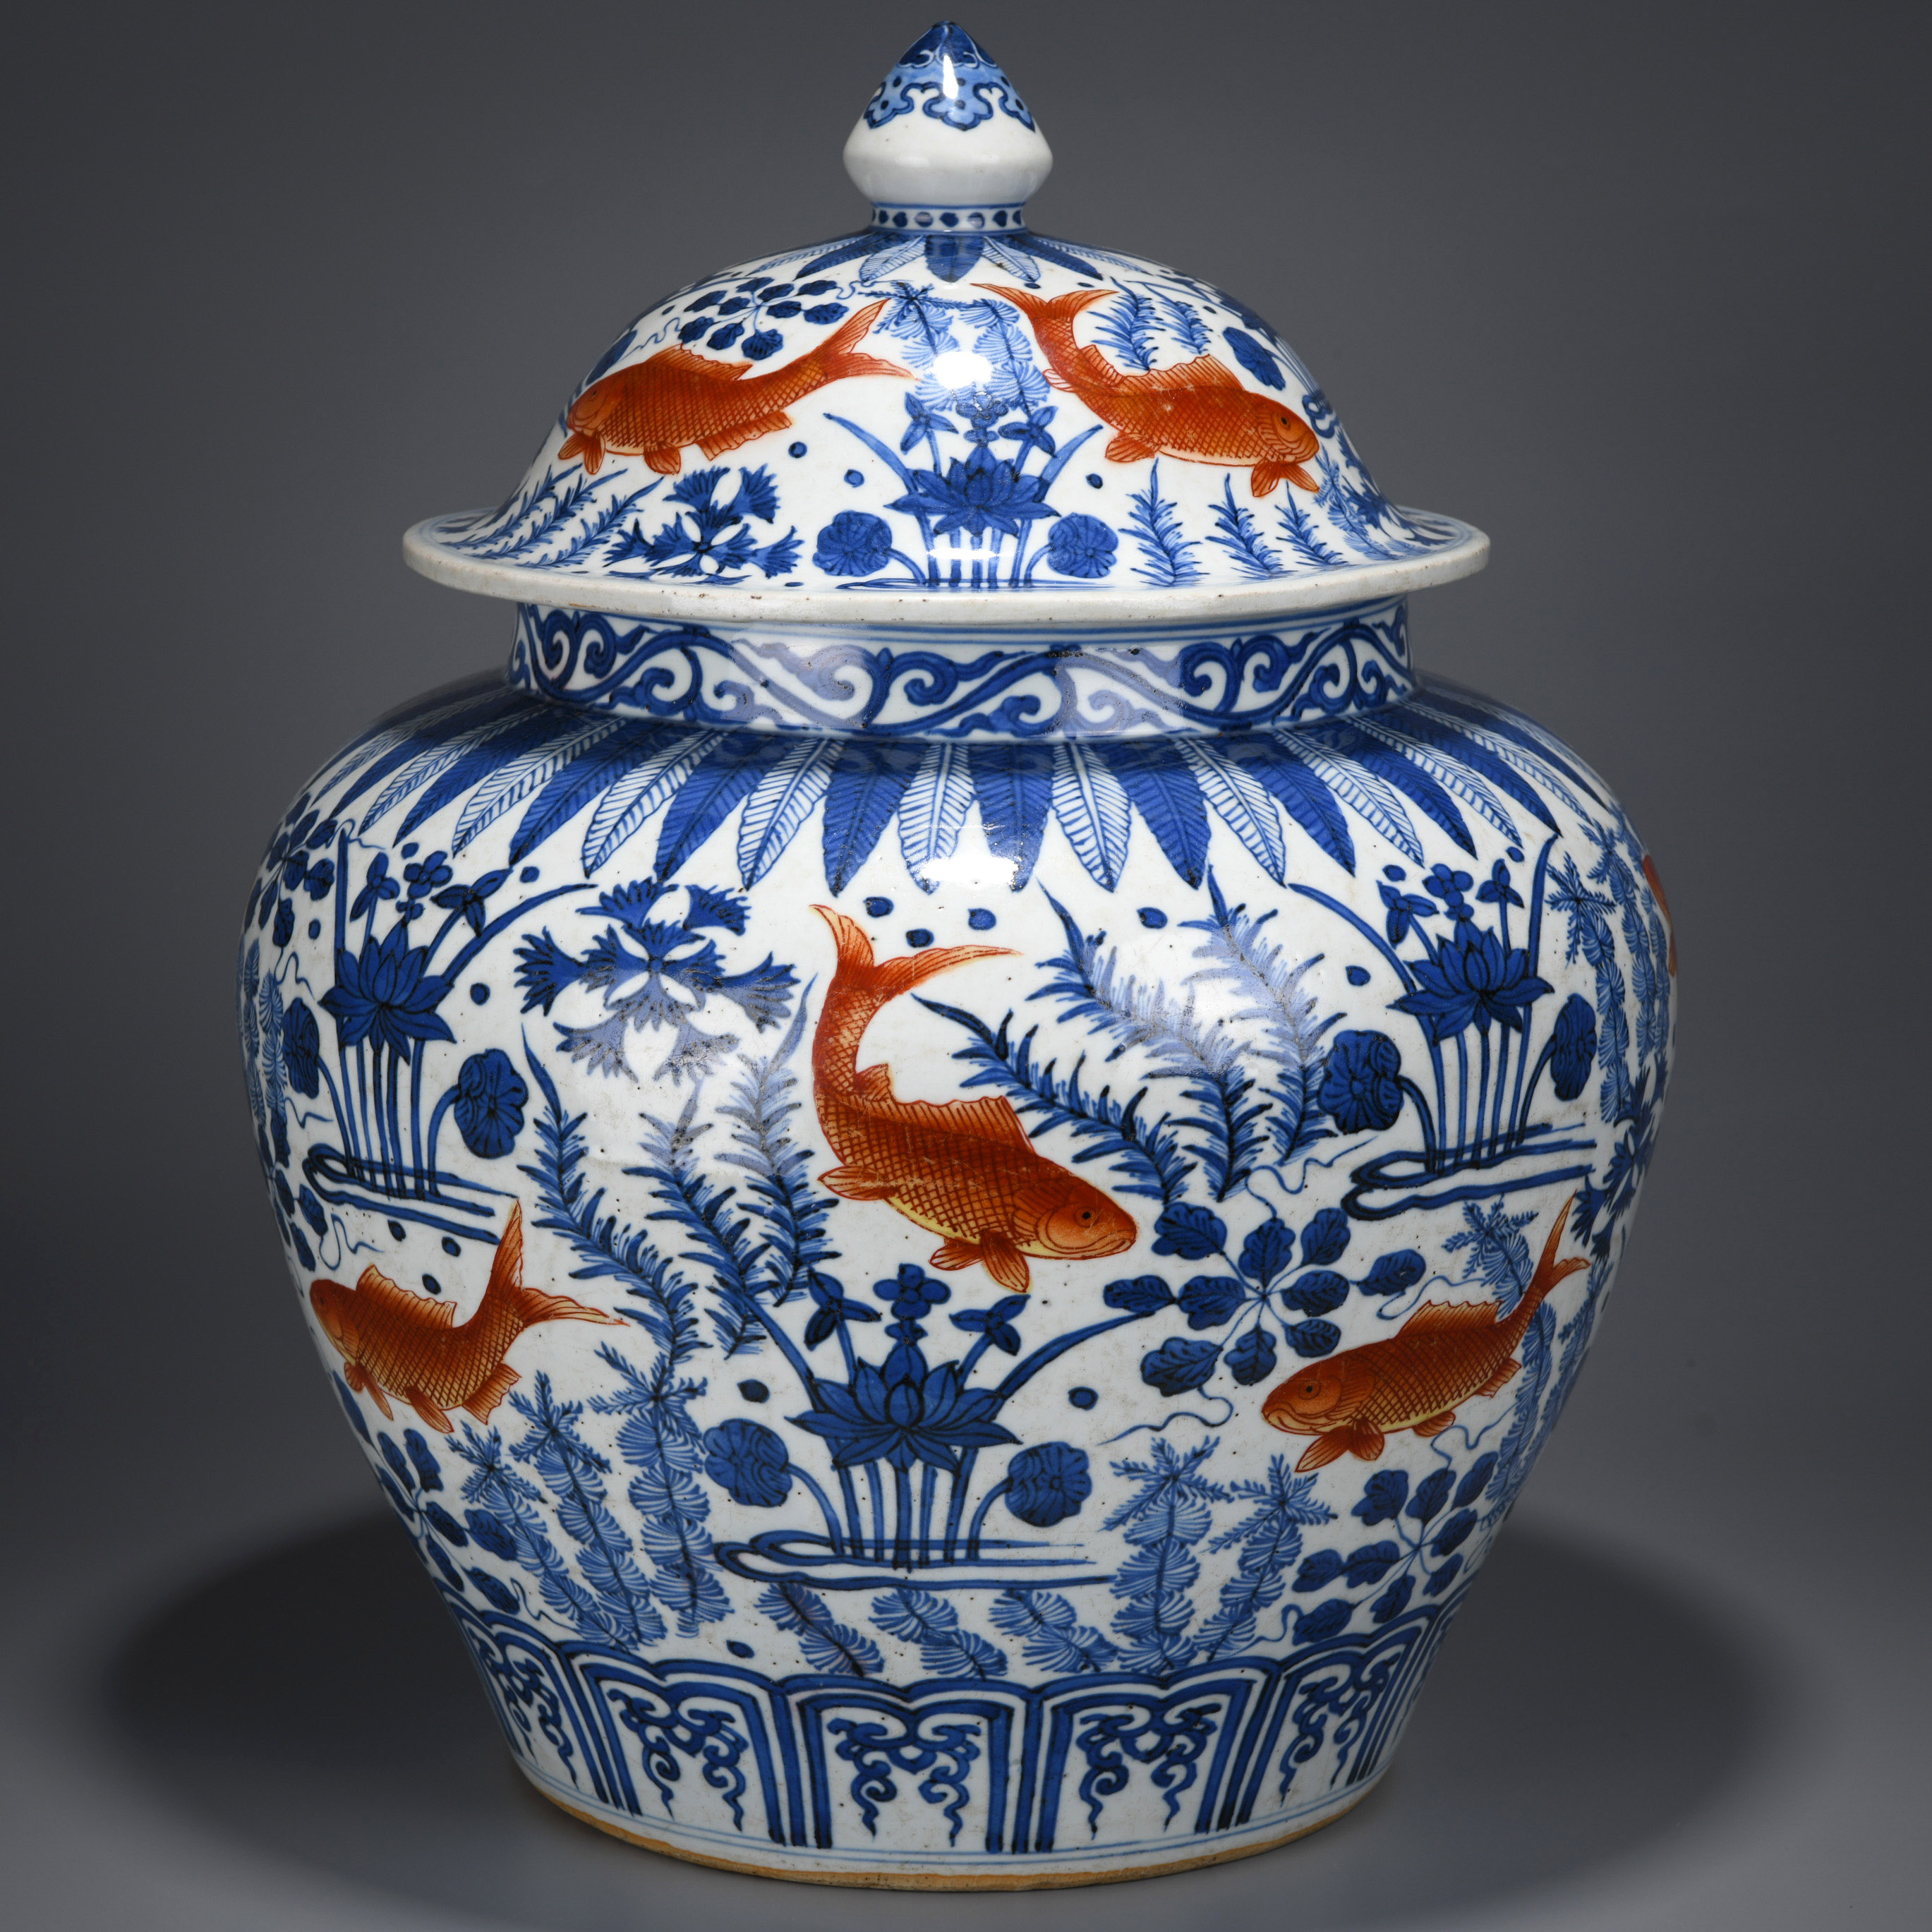 A Chinese Blue and White Lotus Pond Jar - Image 4 of 18